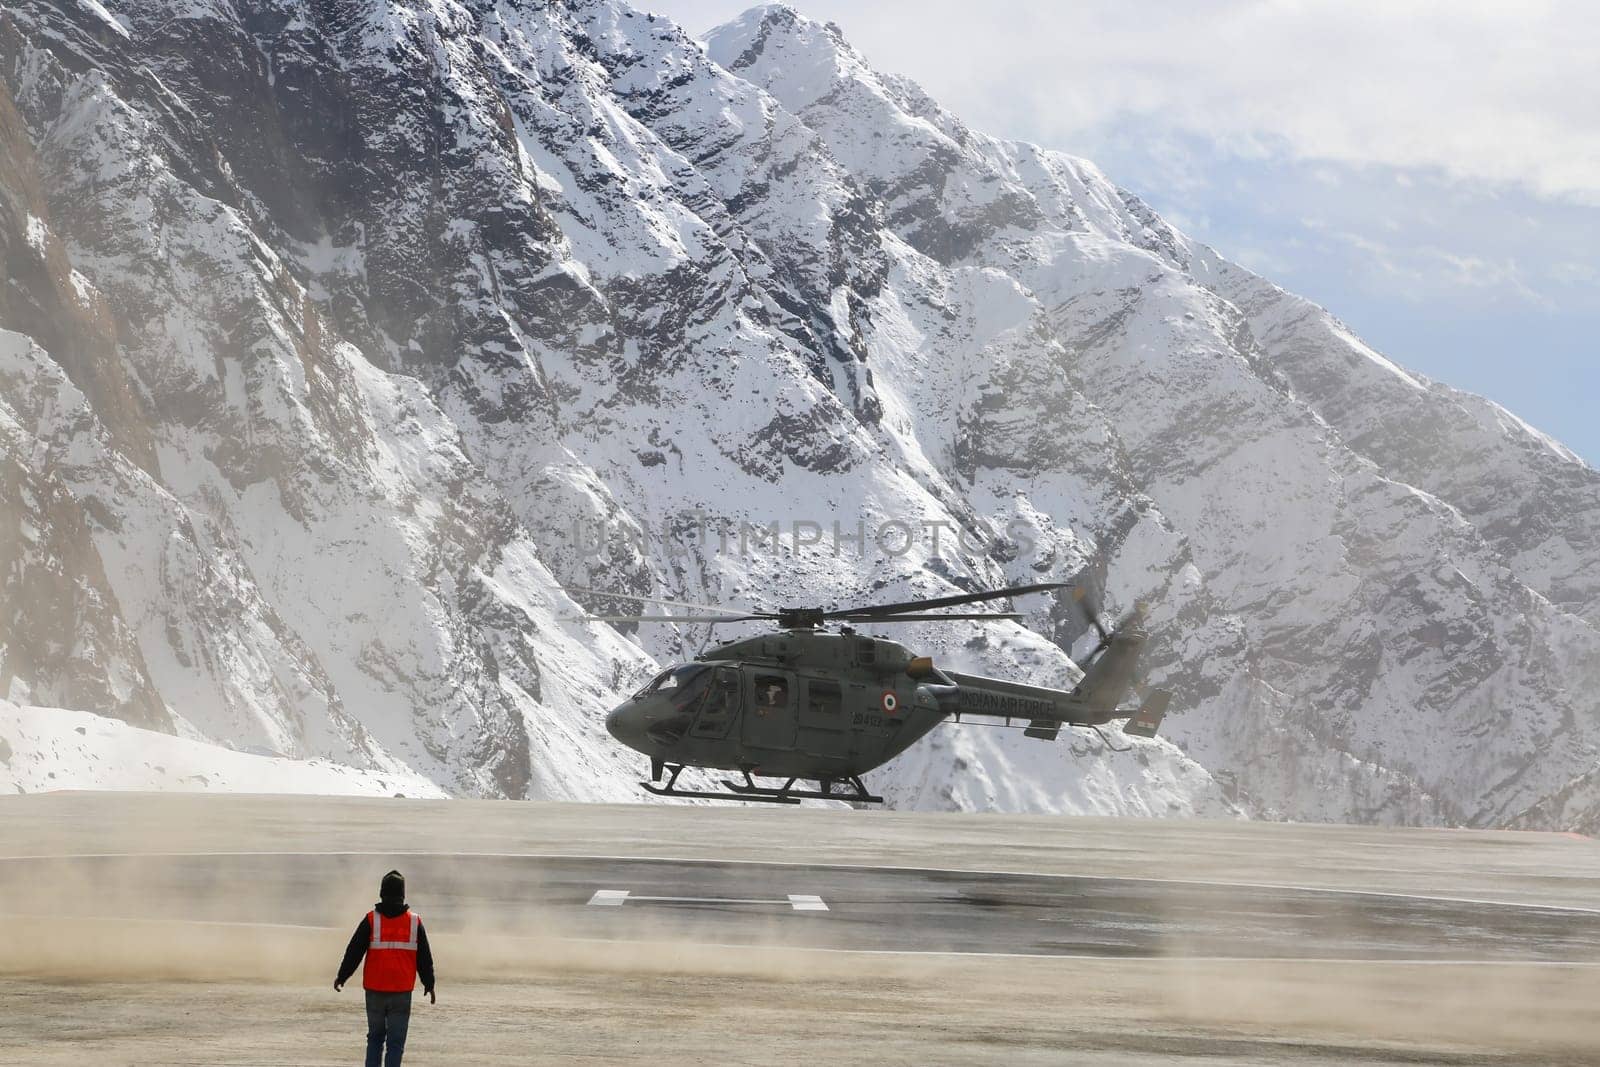 Indian Air force helicopter landing at high altitude in Himalaya. Indian Air Force is the air arm of the Indian Armed Forces. Its ranks fourth amongst the air forces of the world.